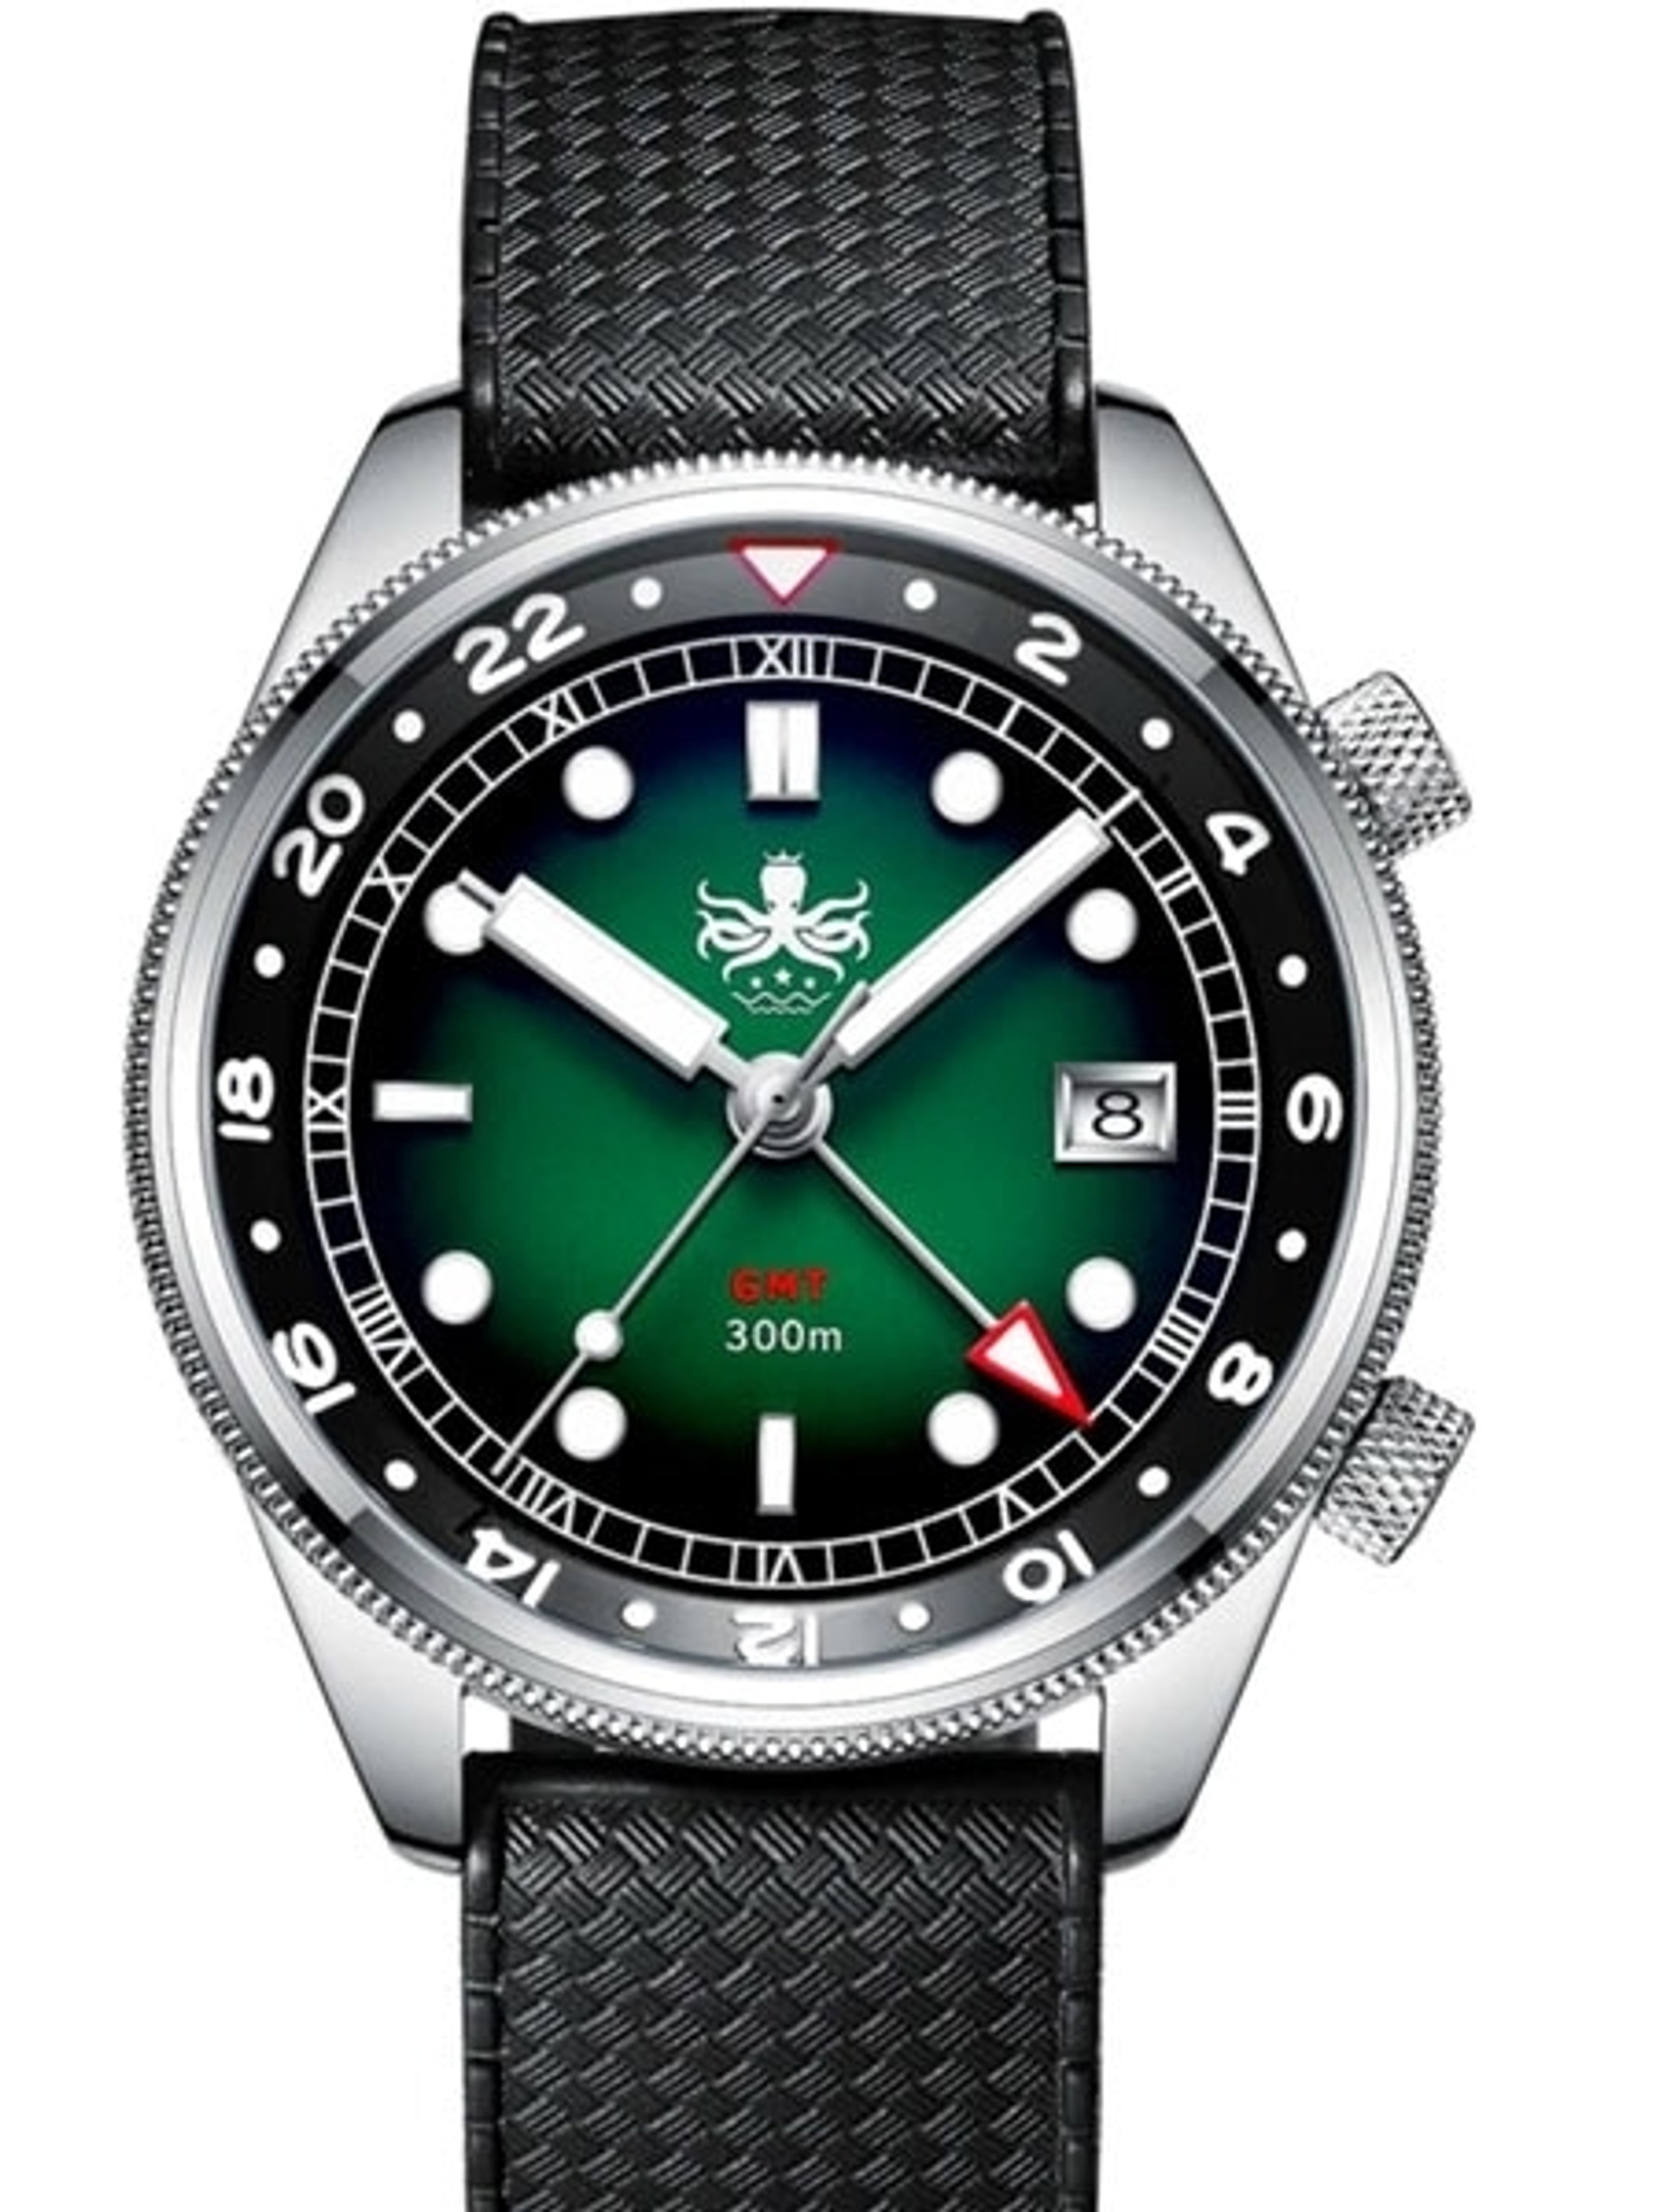 Phoibos PX023A 300 meter Eagle Ray GMT Dual-Time Dive Watch with an ...